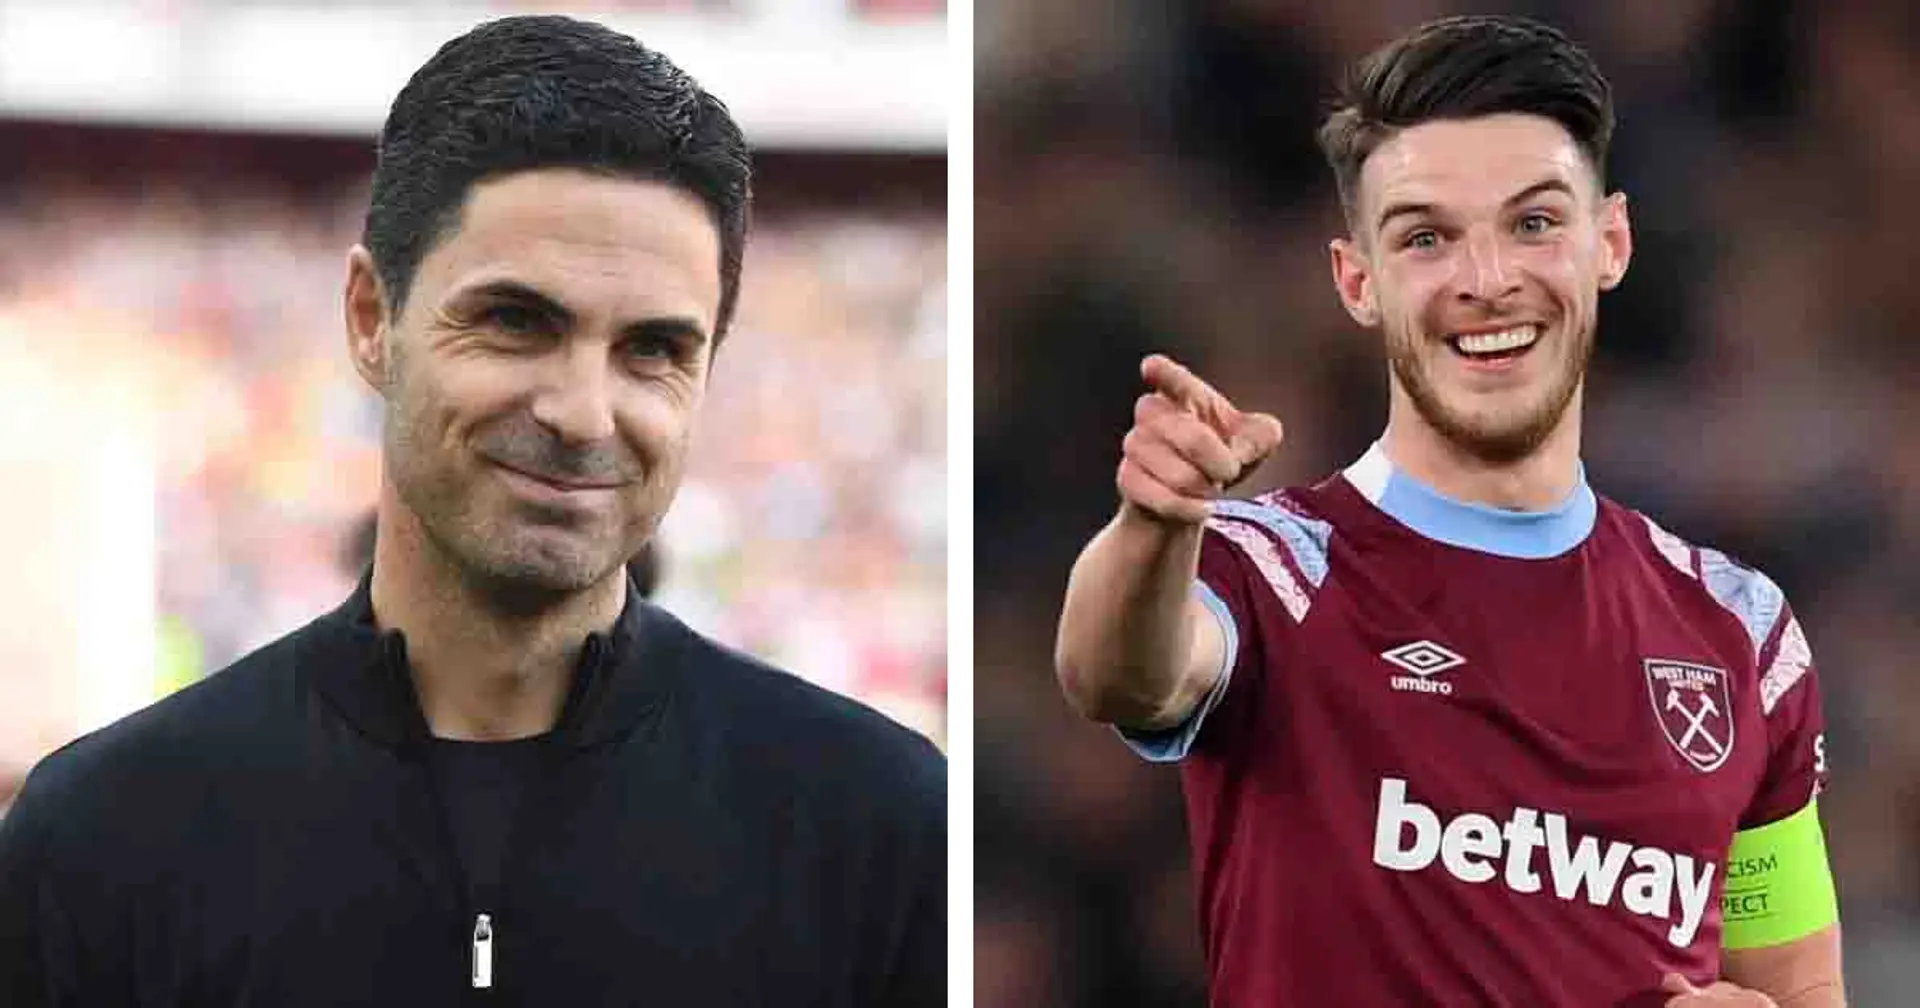 Fabrizio Romano clarifies Arsenal's confidence on Declan Rice transfer amid strong links to Man United (reliability: 5 stars)